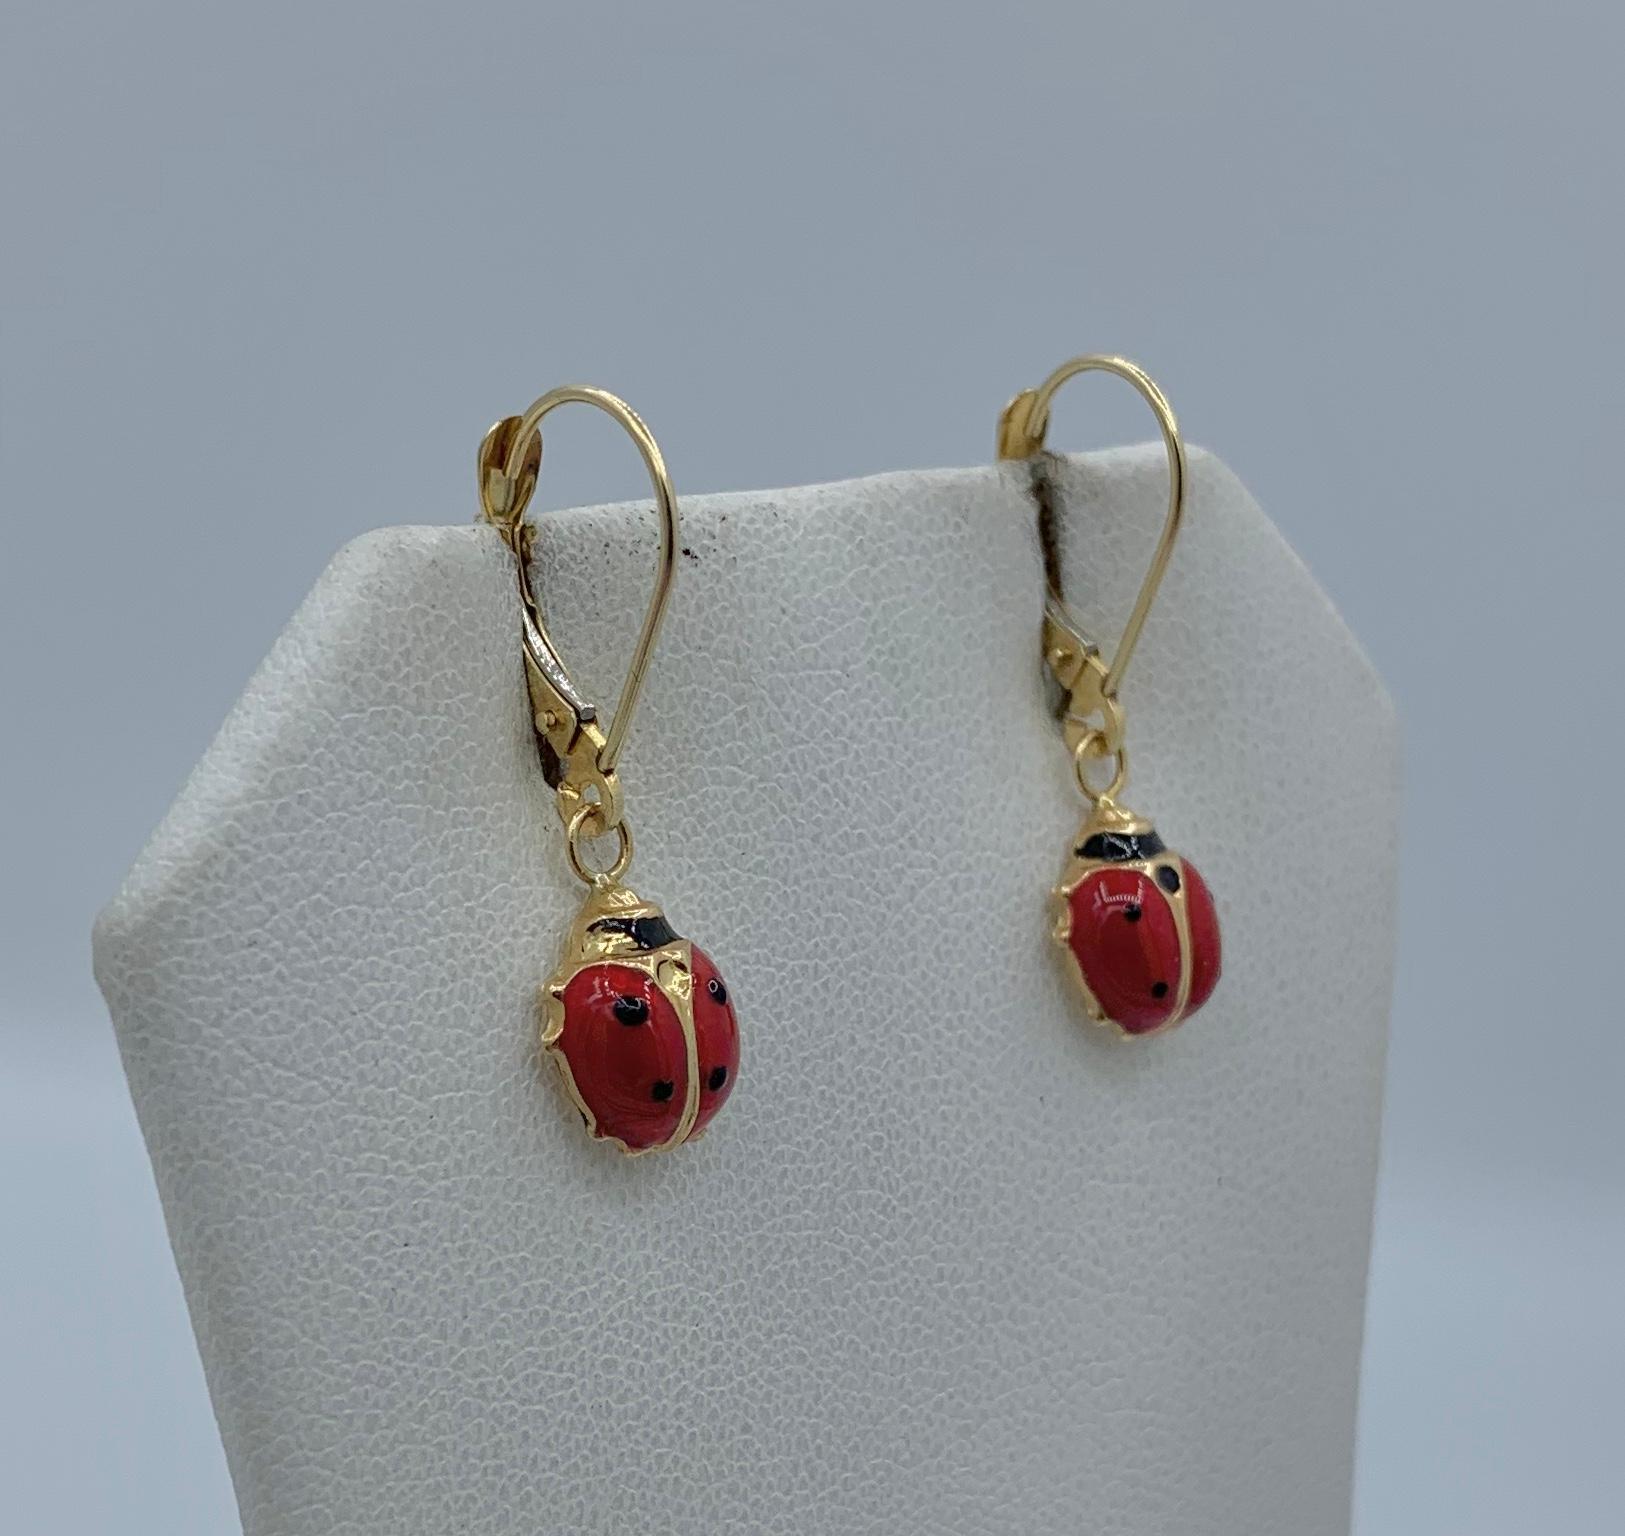 Ladybug Bracelet and Earrings 14 Karat Gold Enamel Beetle Insect In Good Condition For Sale In New York, NY